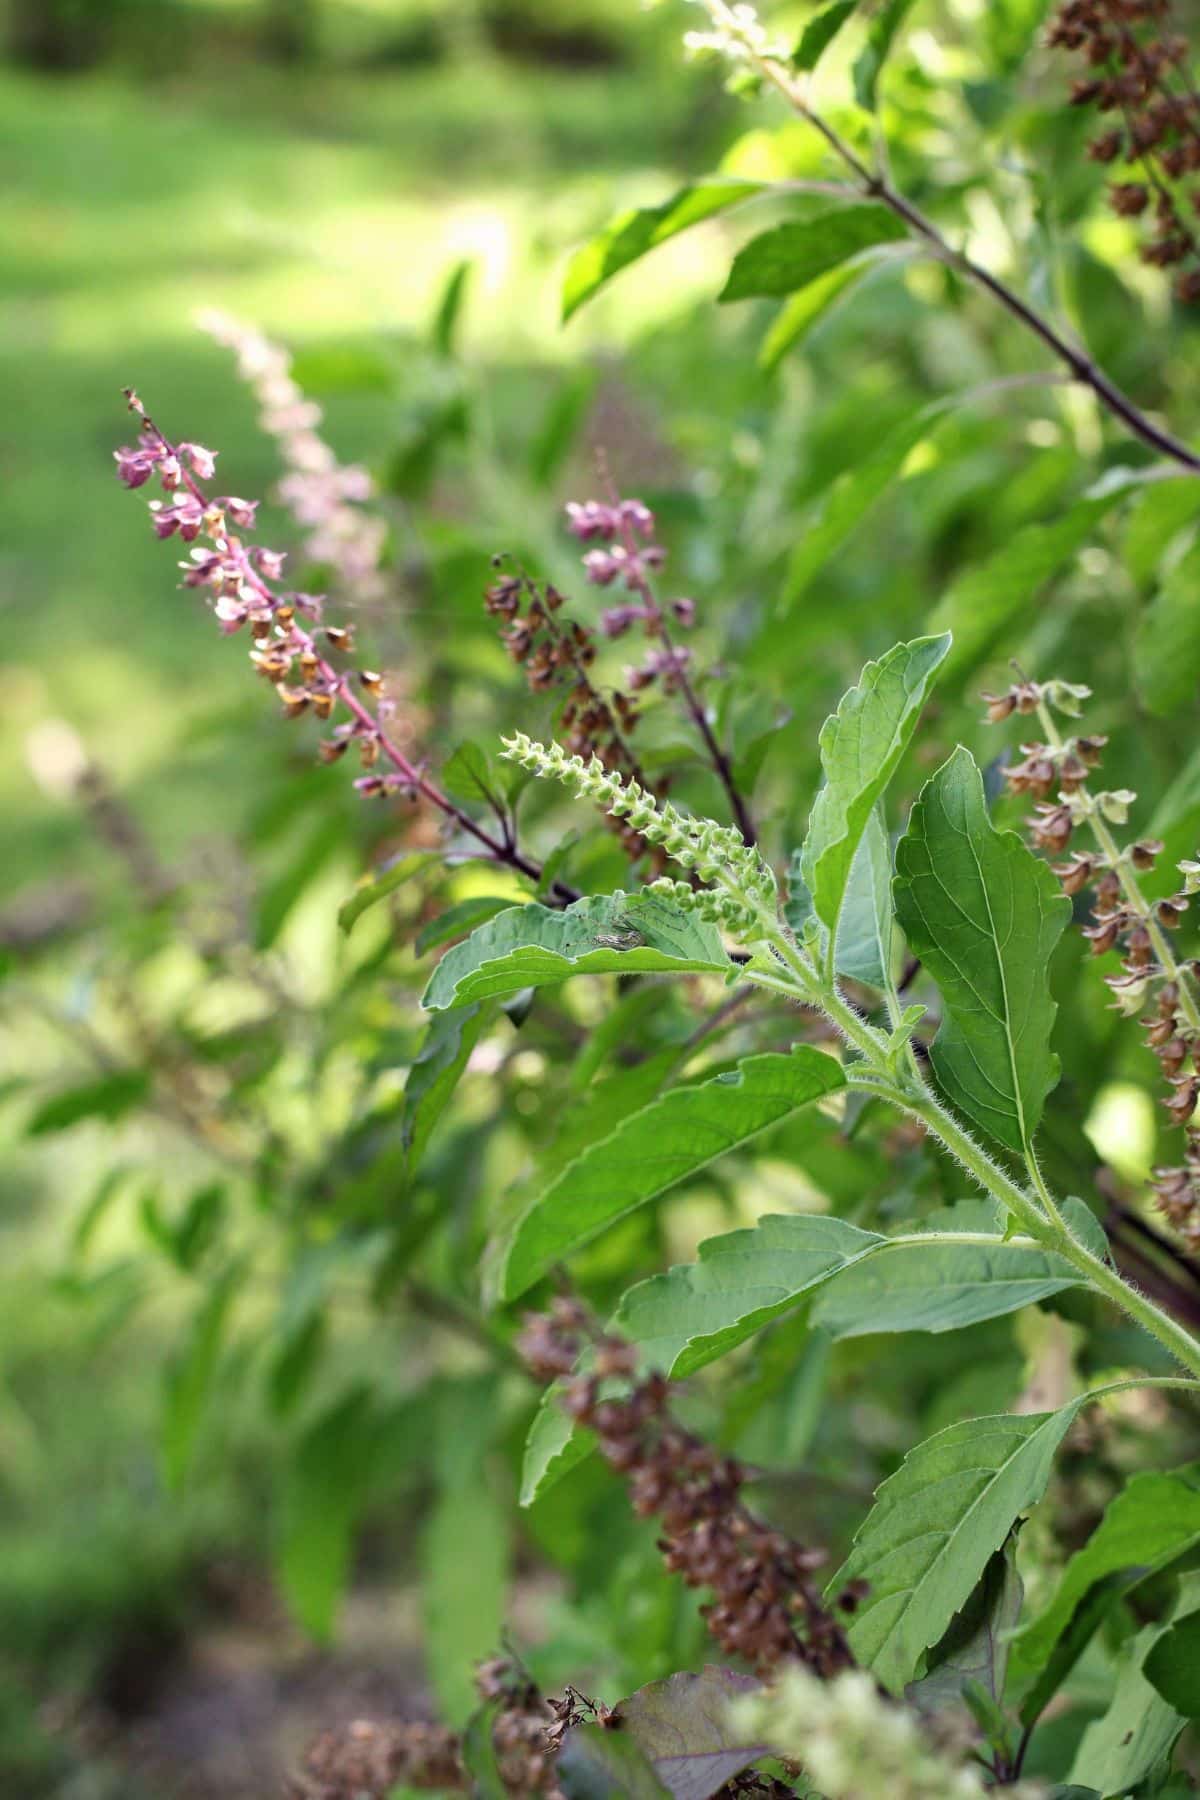 Close up view of holy basil plant, known for its medicinal properties.